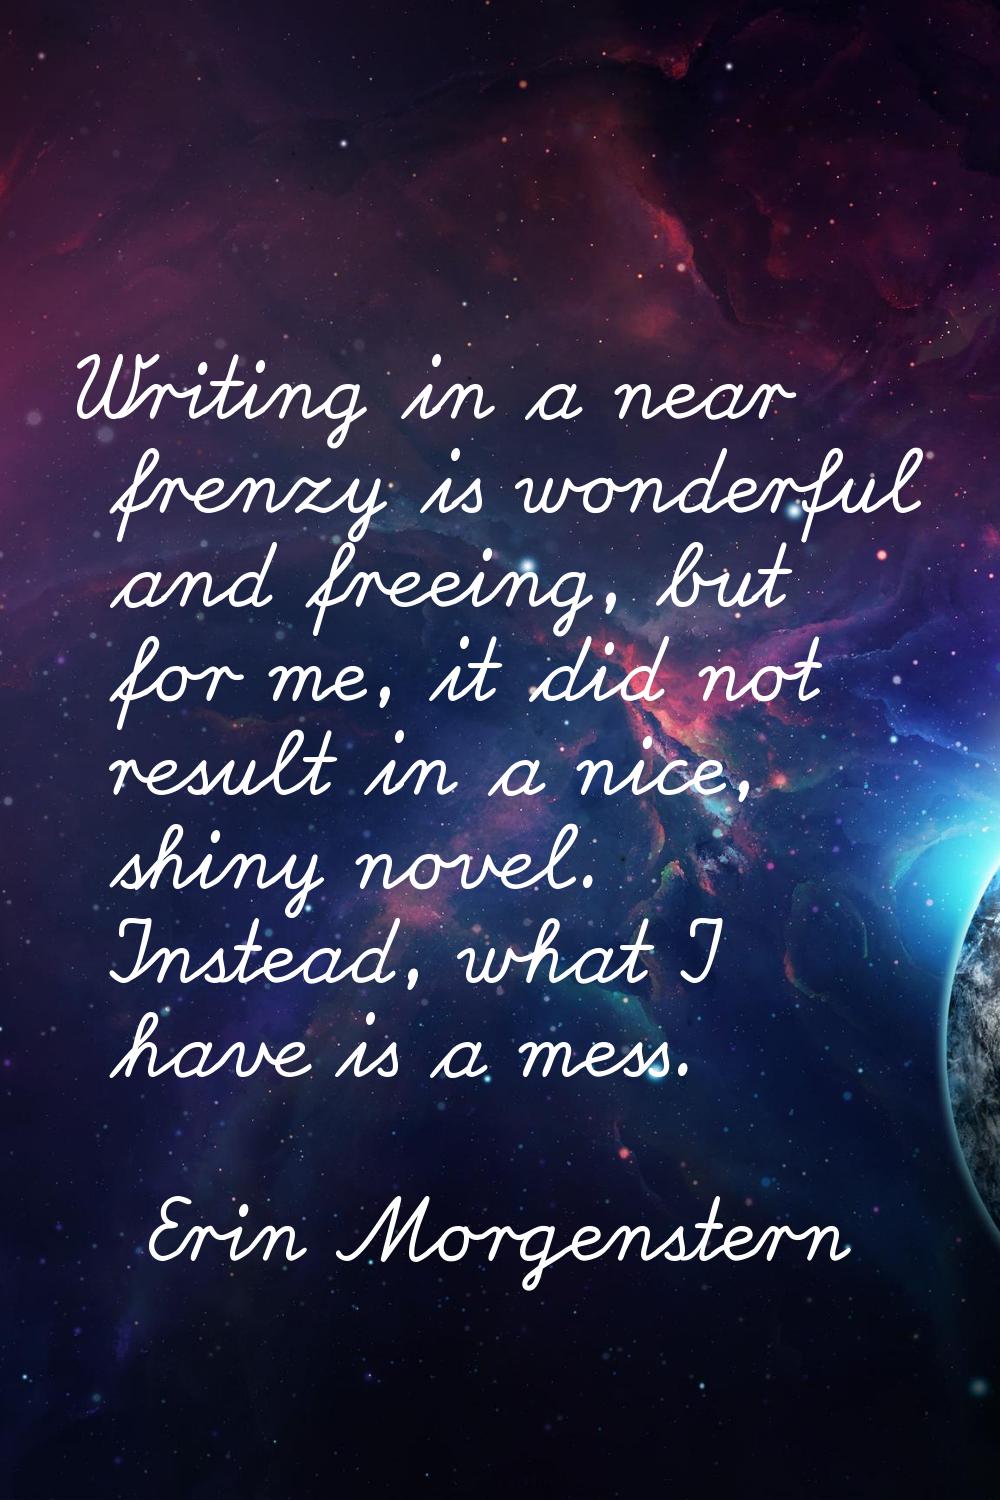 Writing in a near frenzy is wonderful and freeing, but for me, it did not result in a nice, shiny n